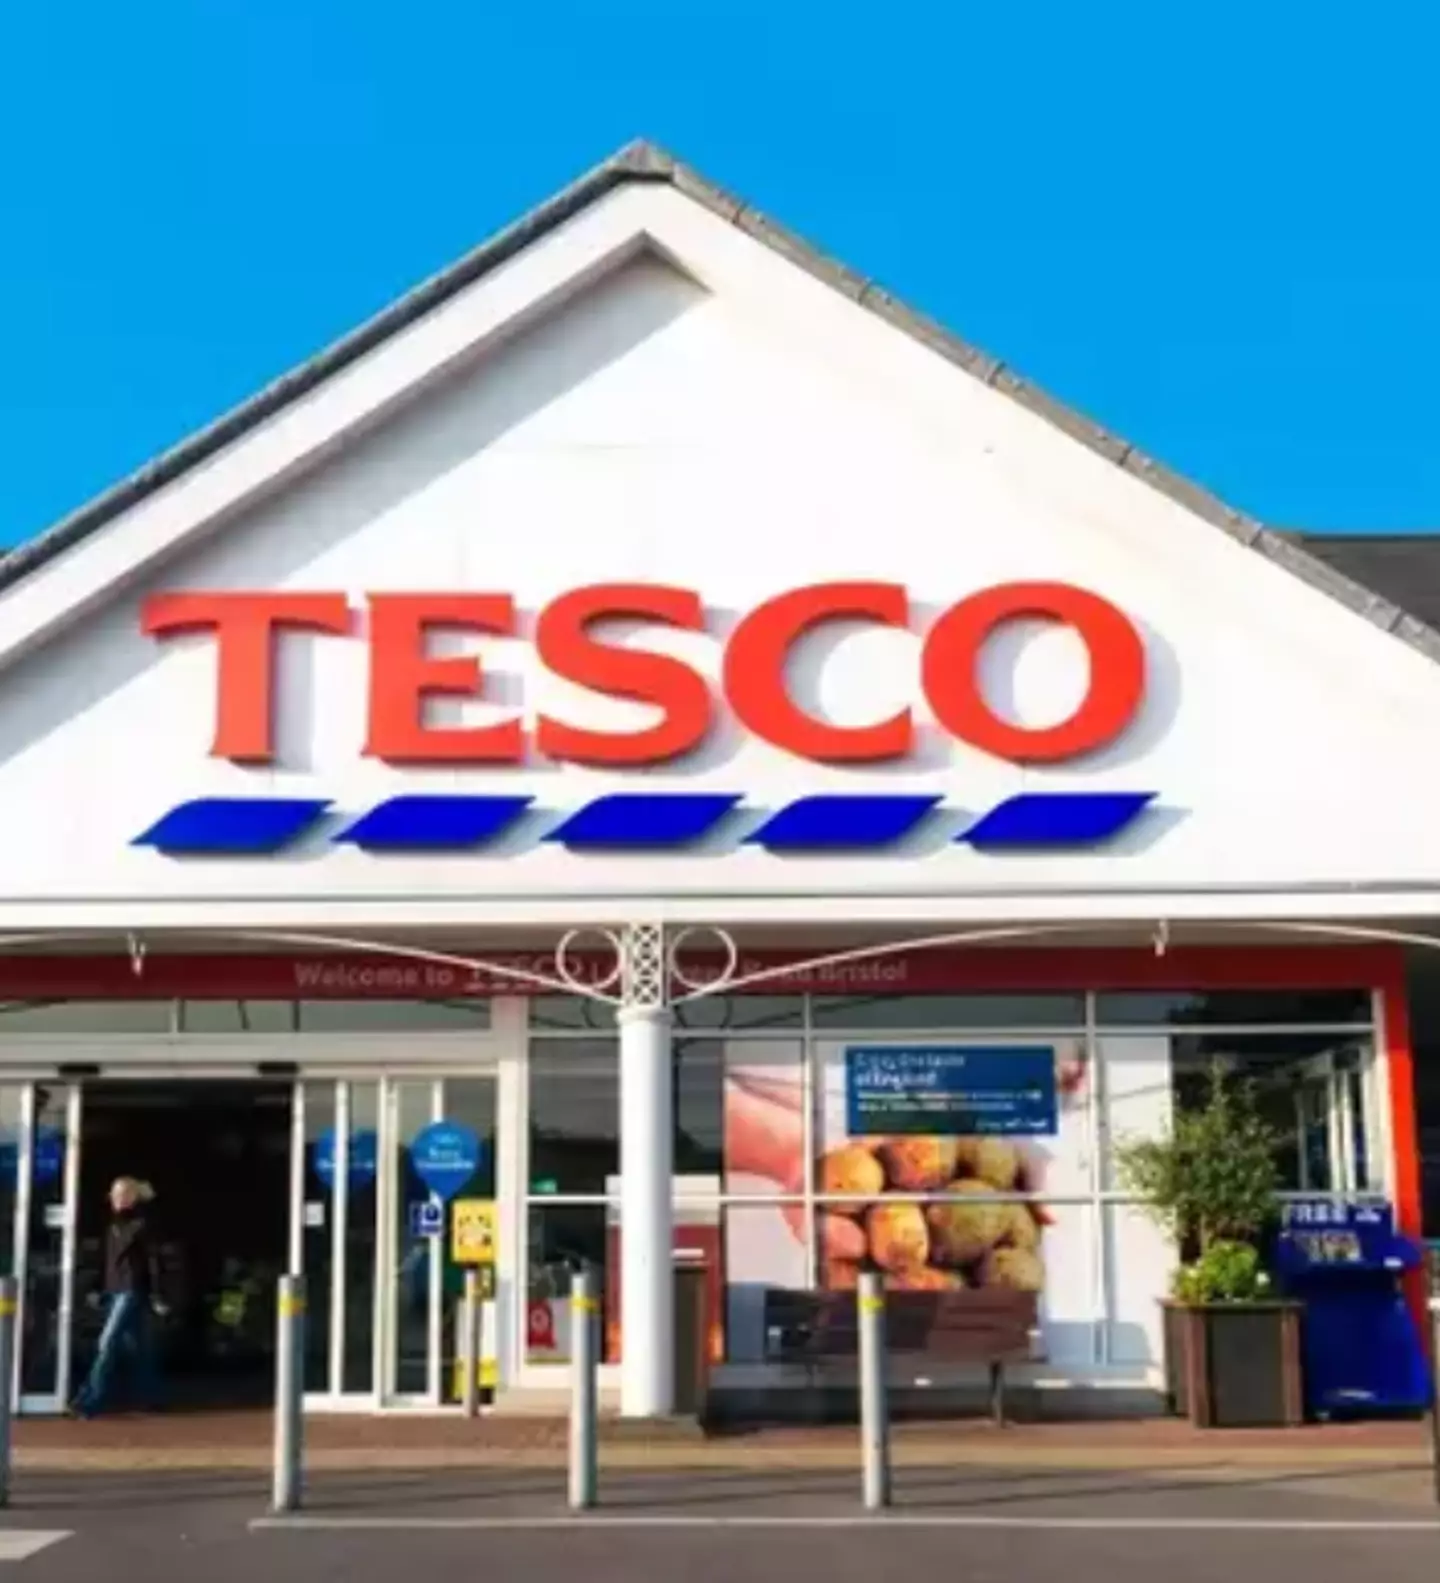 Tesco shoppers will have to download a new app to continue collecting points.